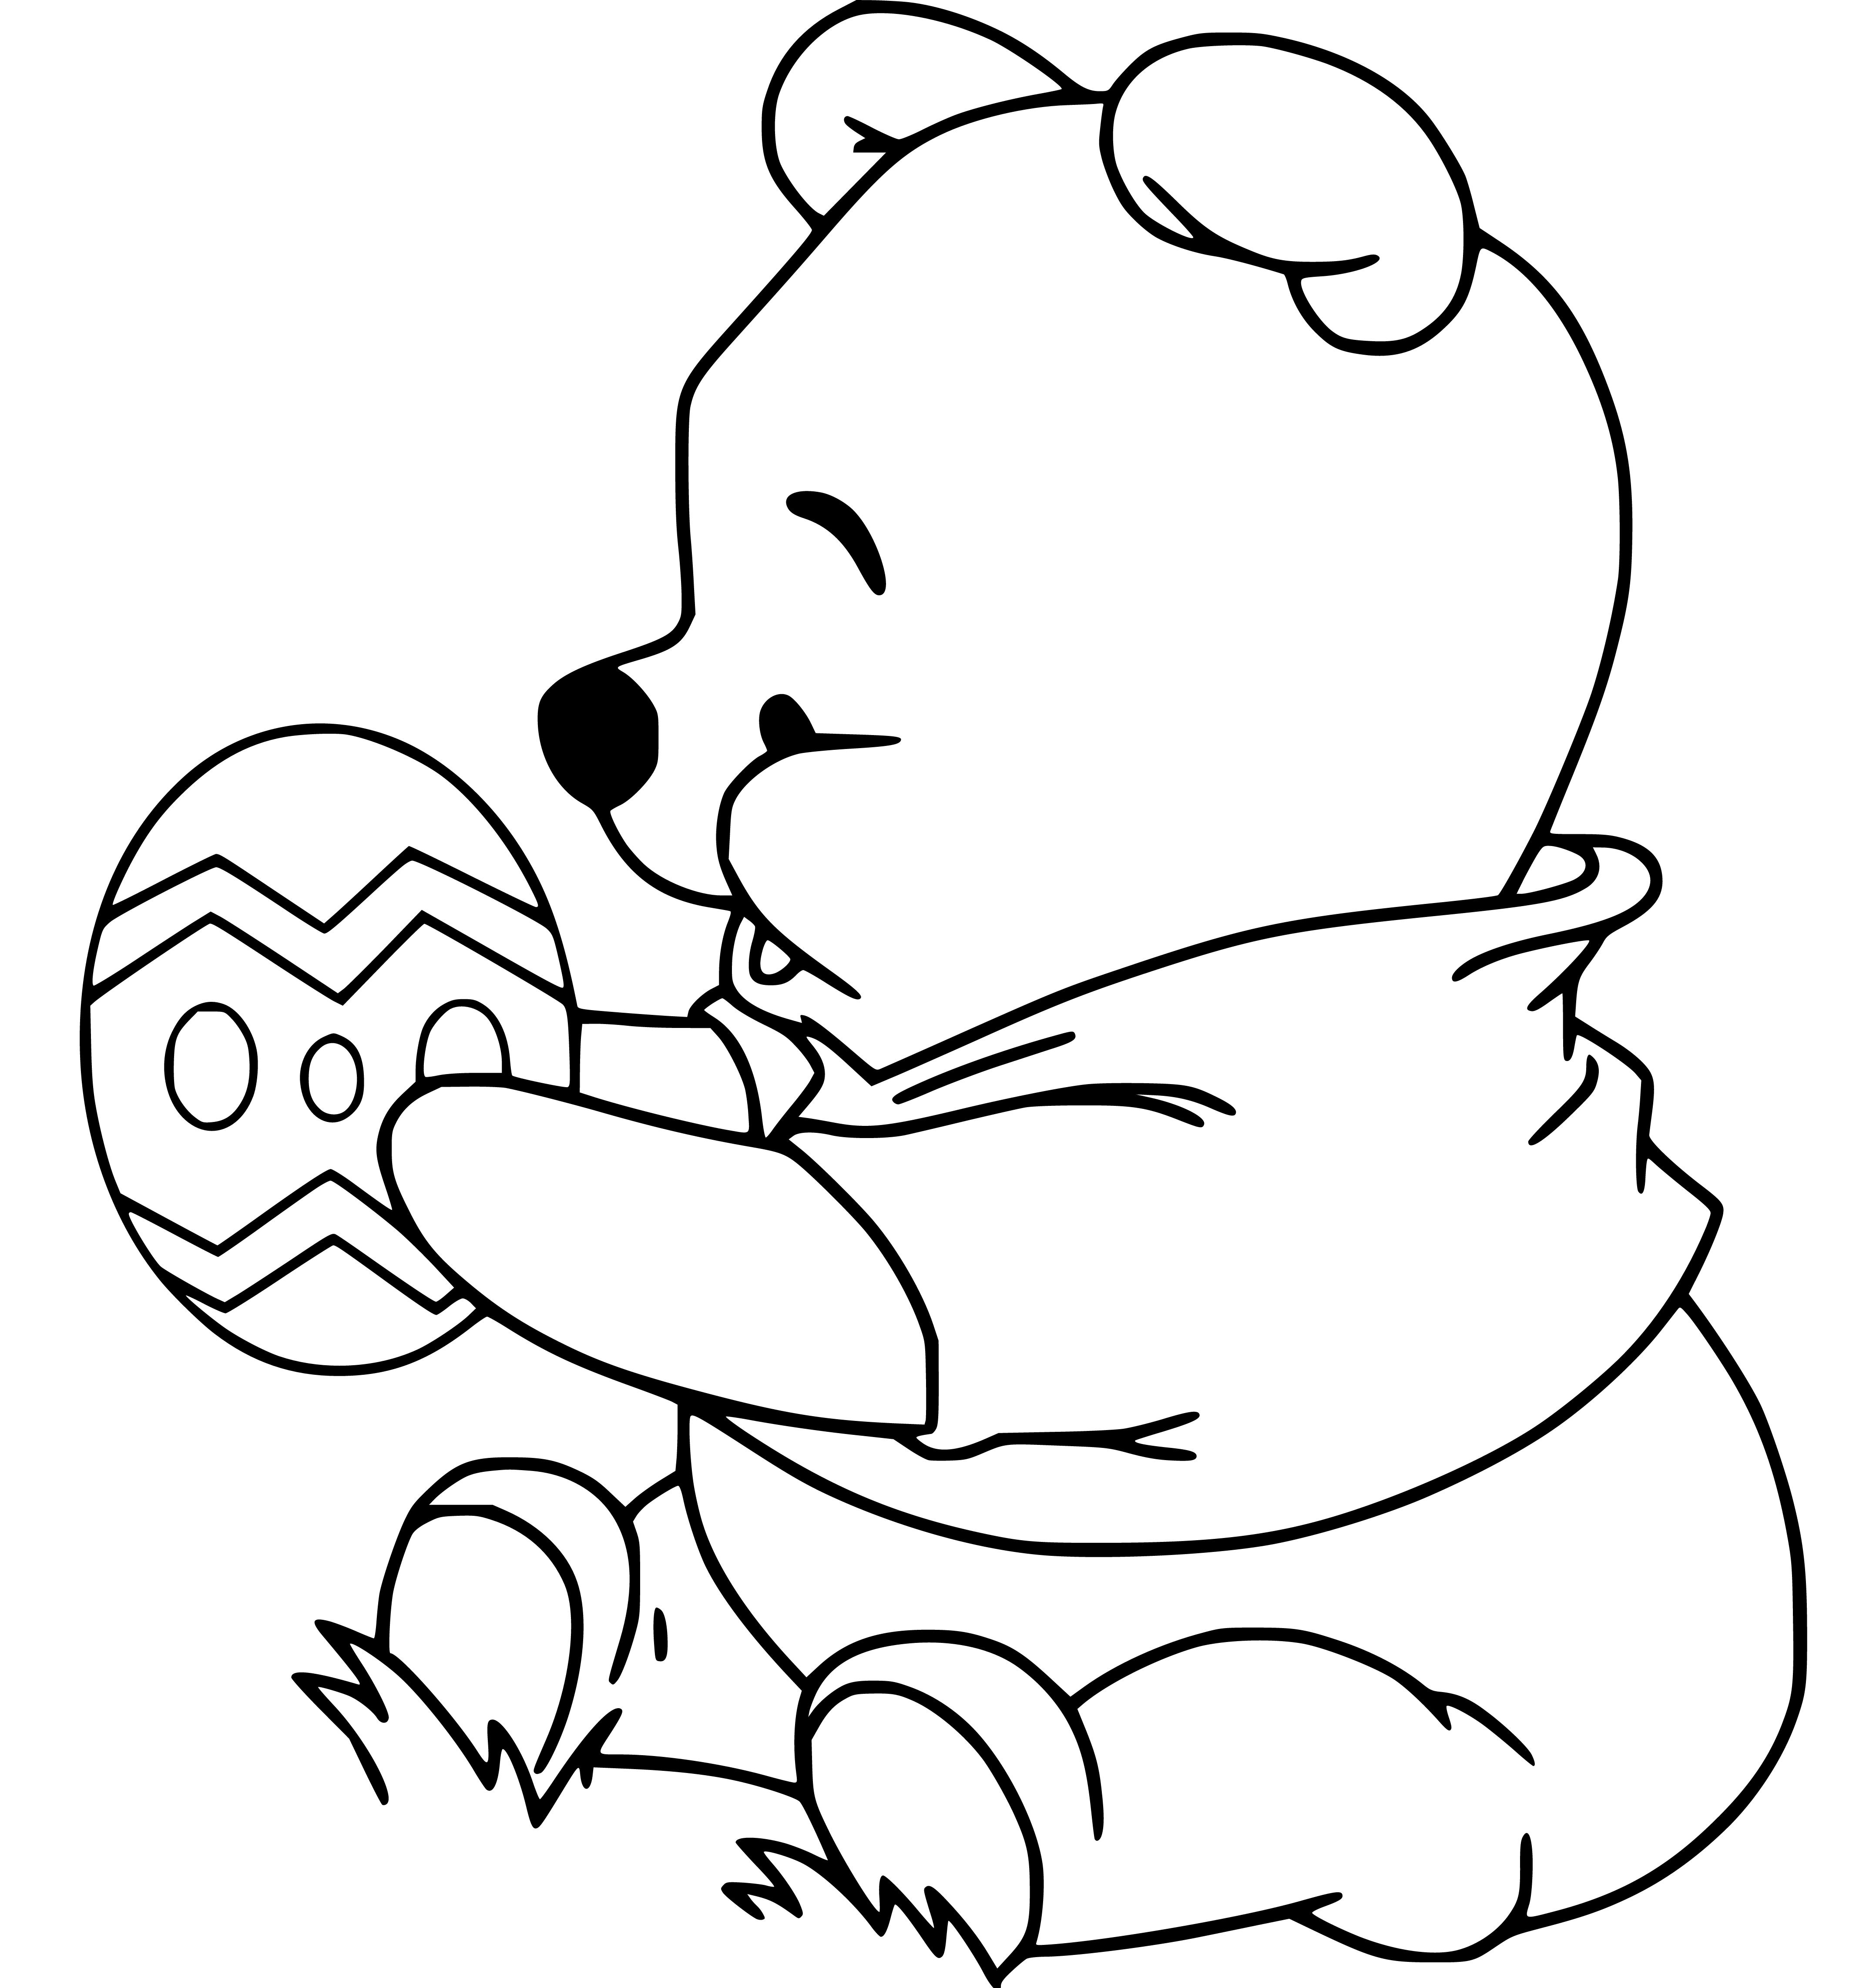 Printable Pooh Winnie holding Easter egg Coloring Page for kids.